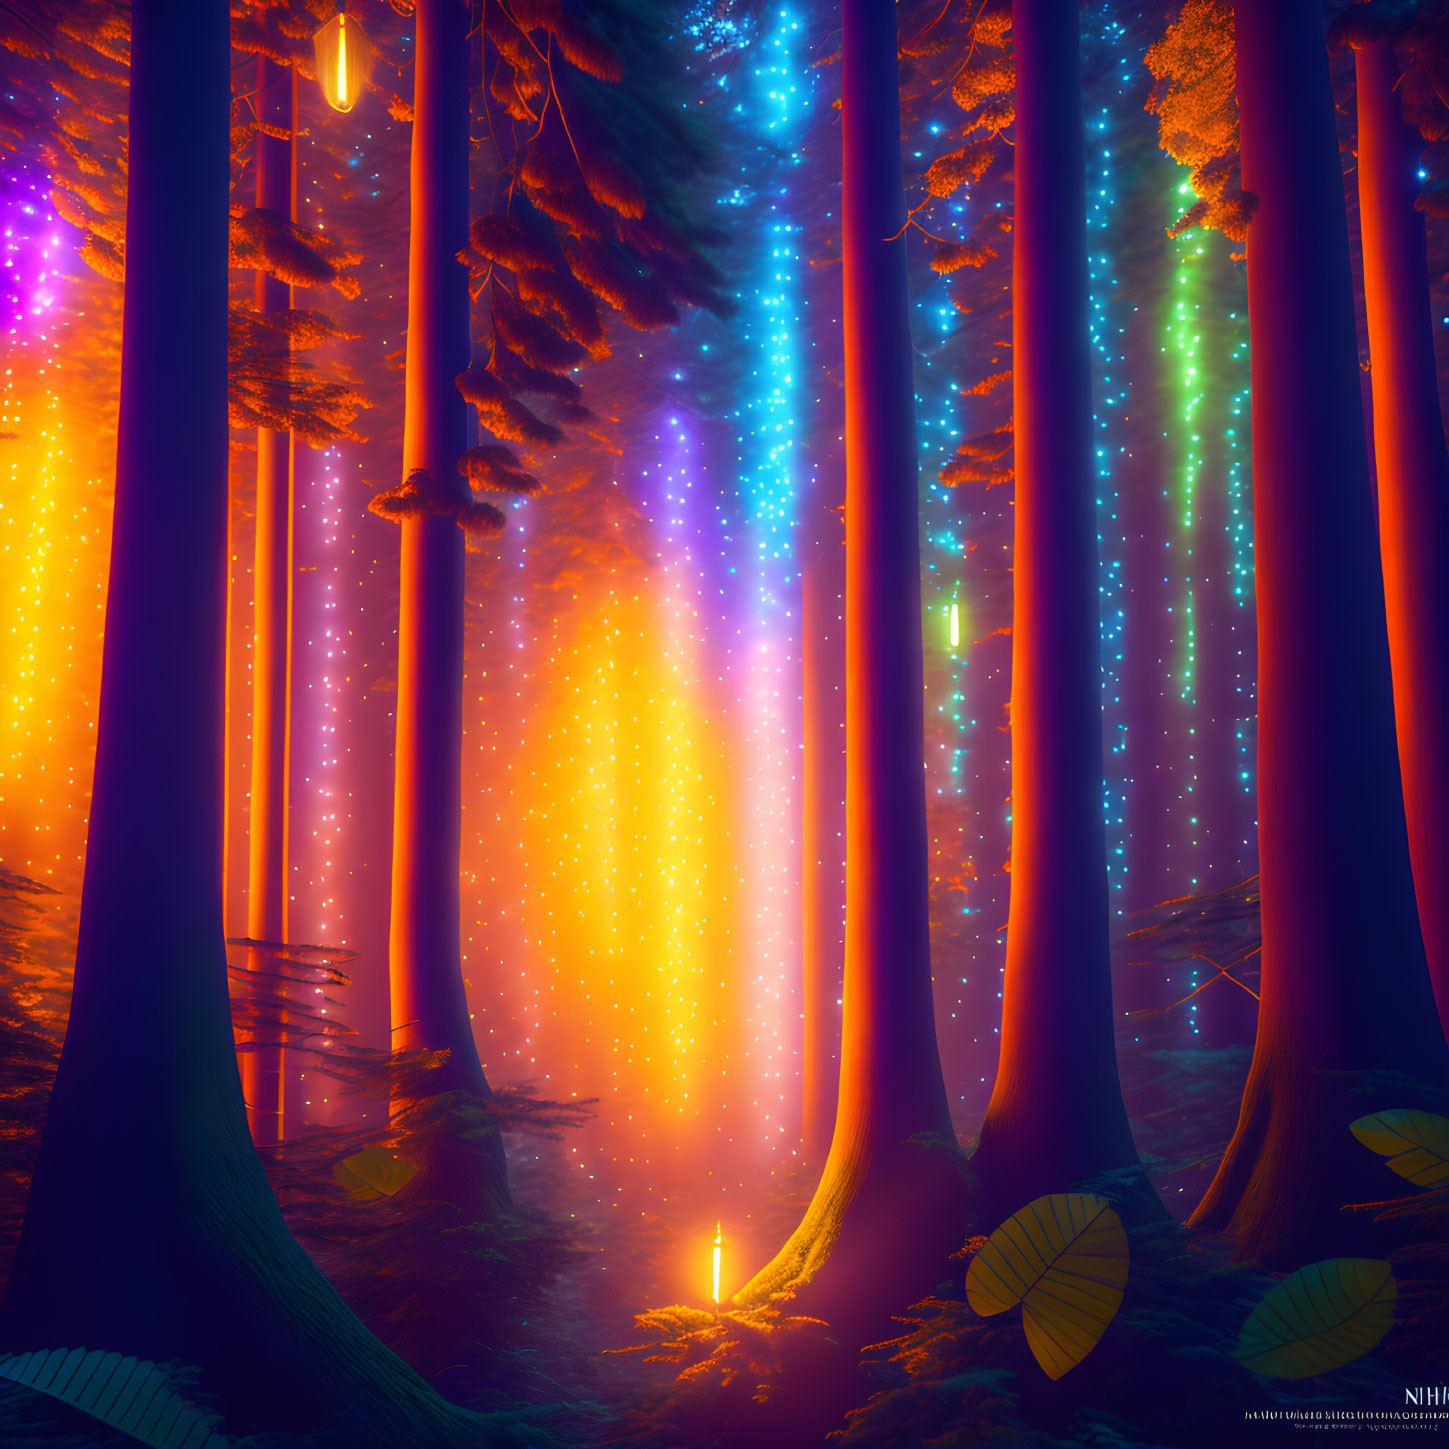 Mystical forest with towering trees and colorful light beams